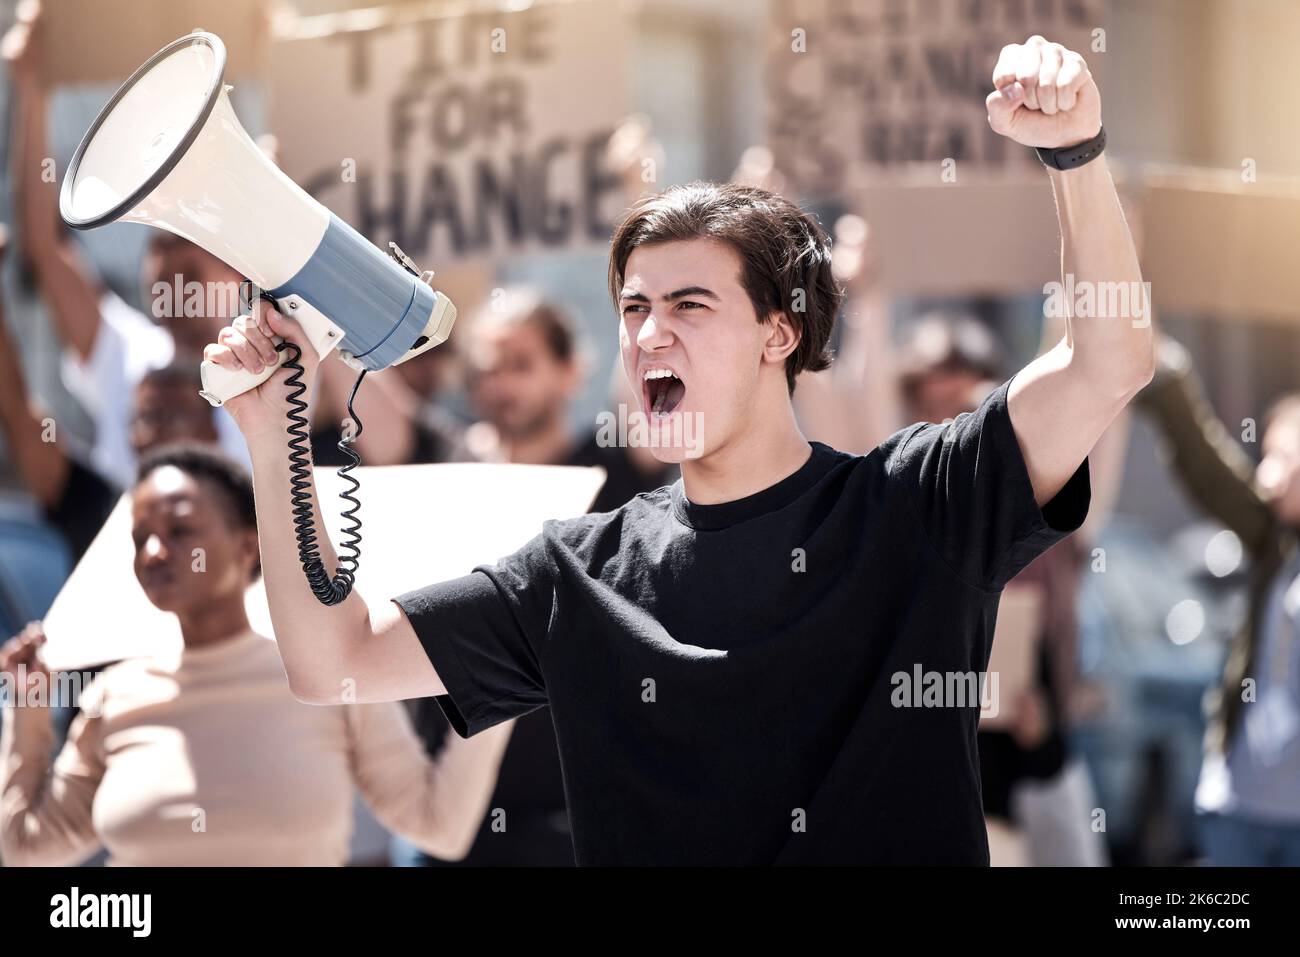 If we dont who will. a young man yelling through a megaphone during a protest. Stock Photo